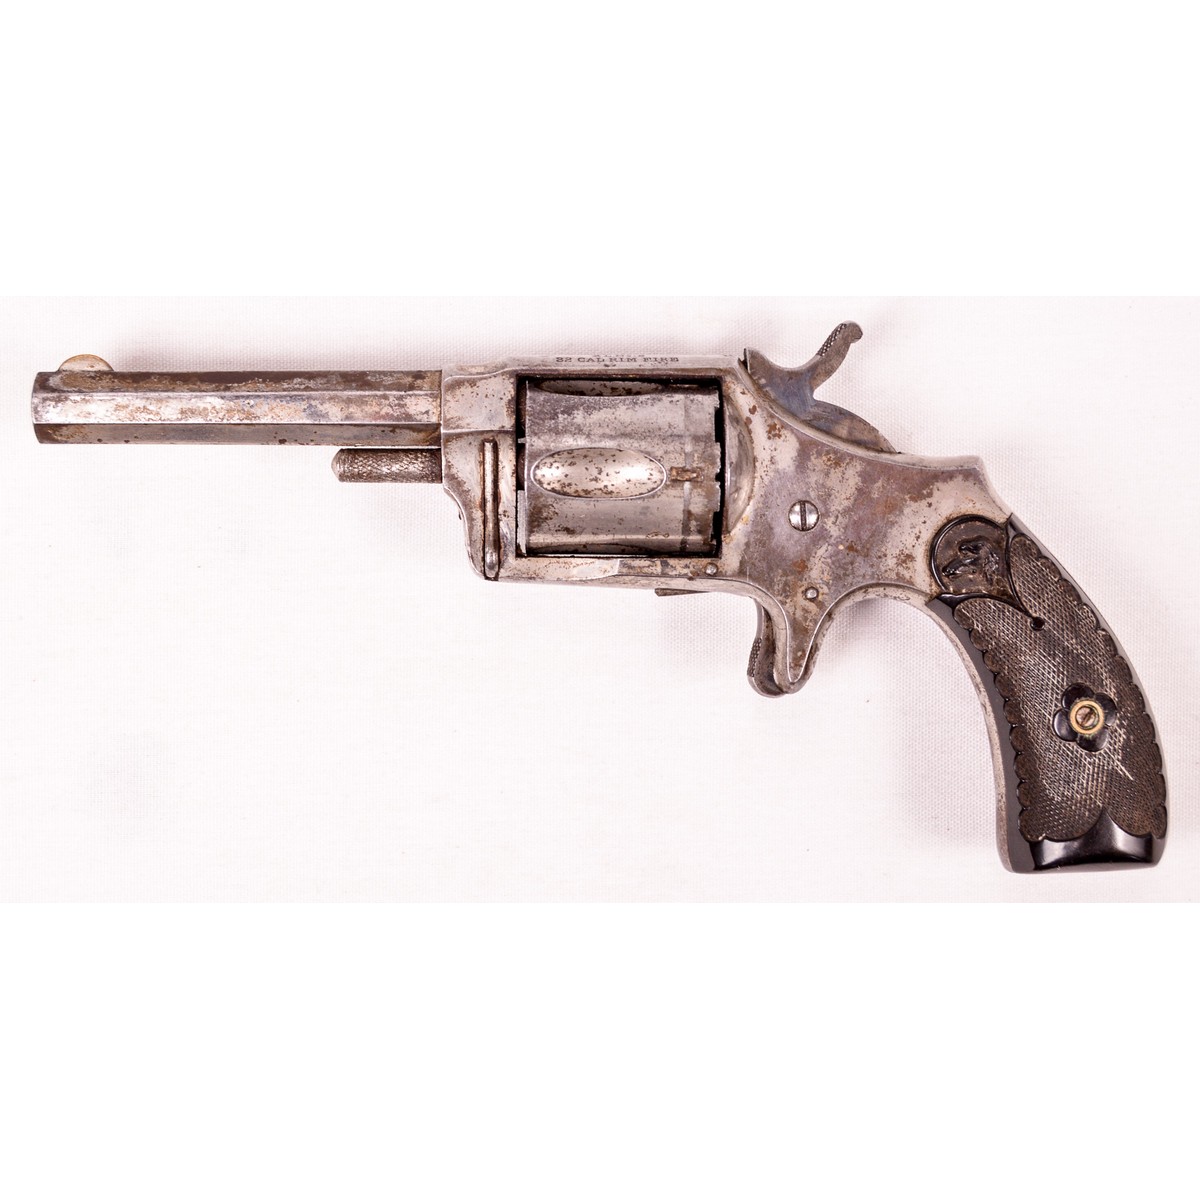 Sold at Auction: HOPKINS & ALLEN ARMS CO. XL DOUBLE ACTION .32 Cal